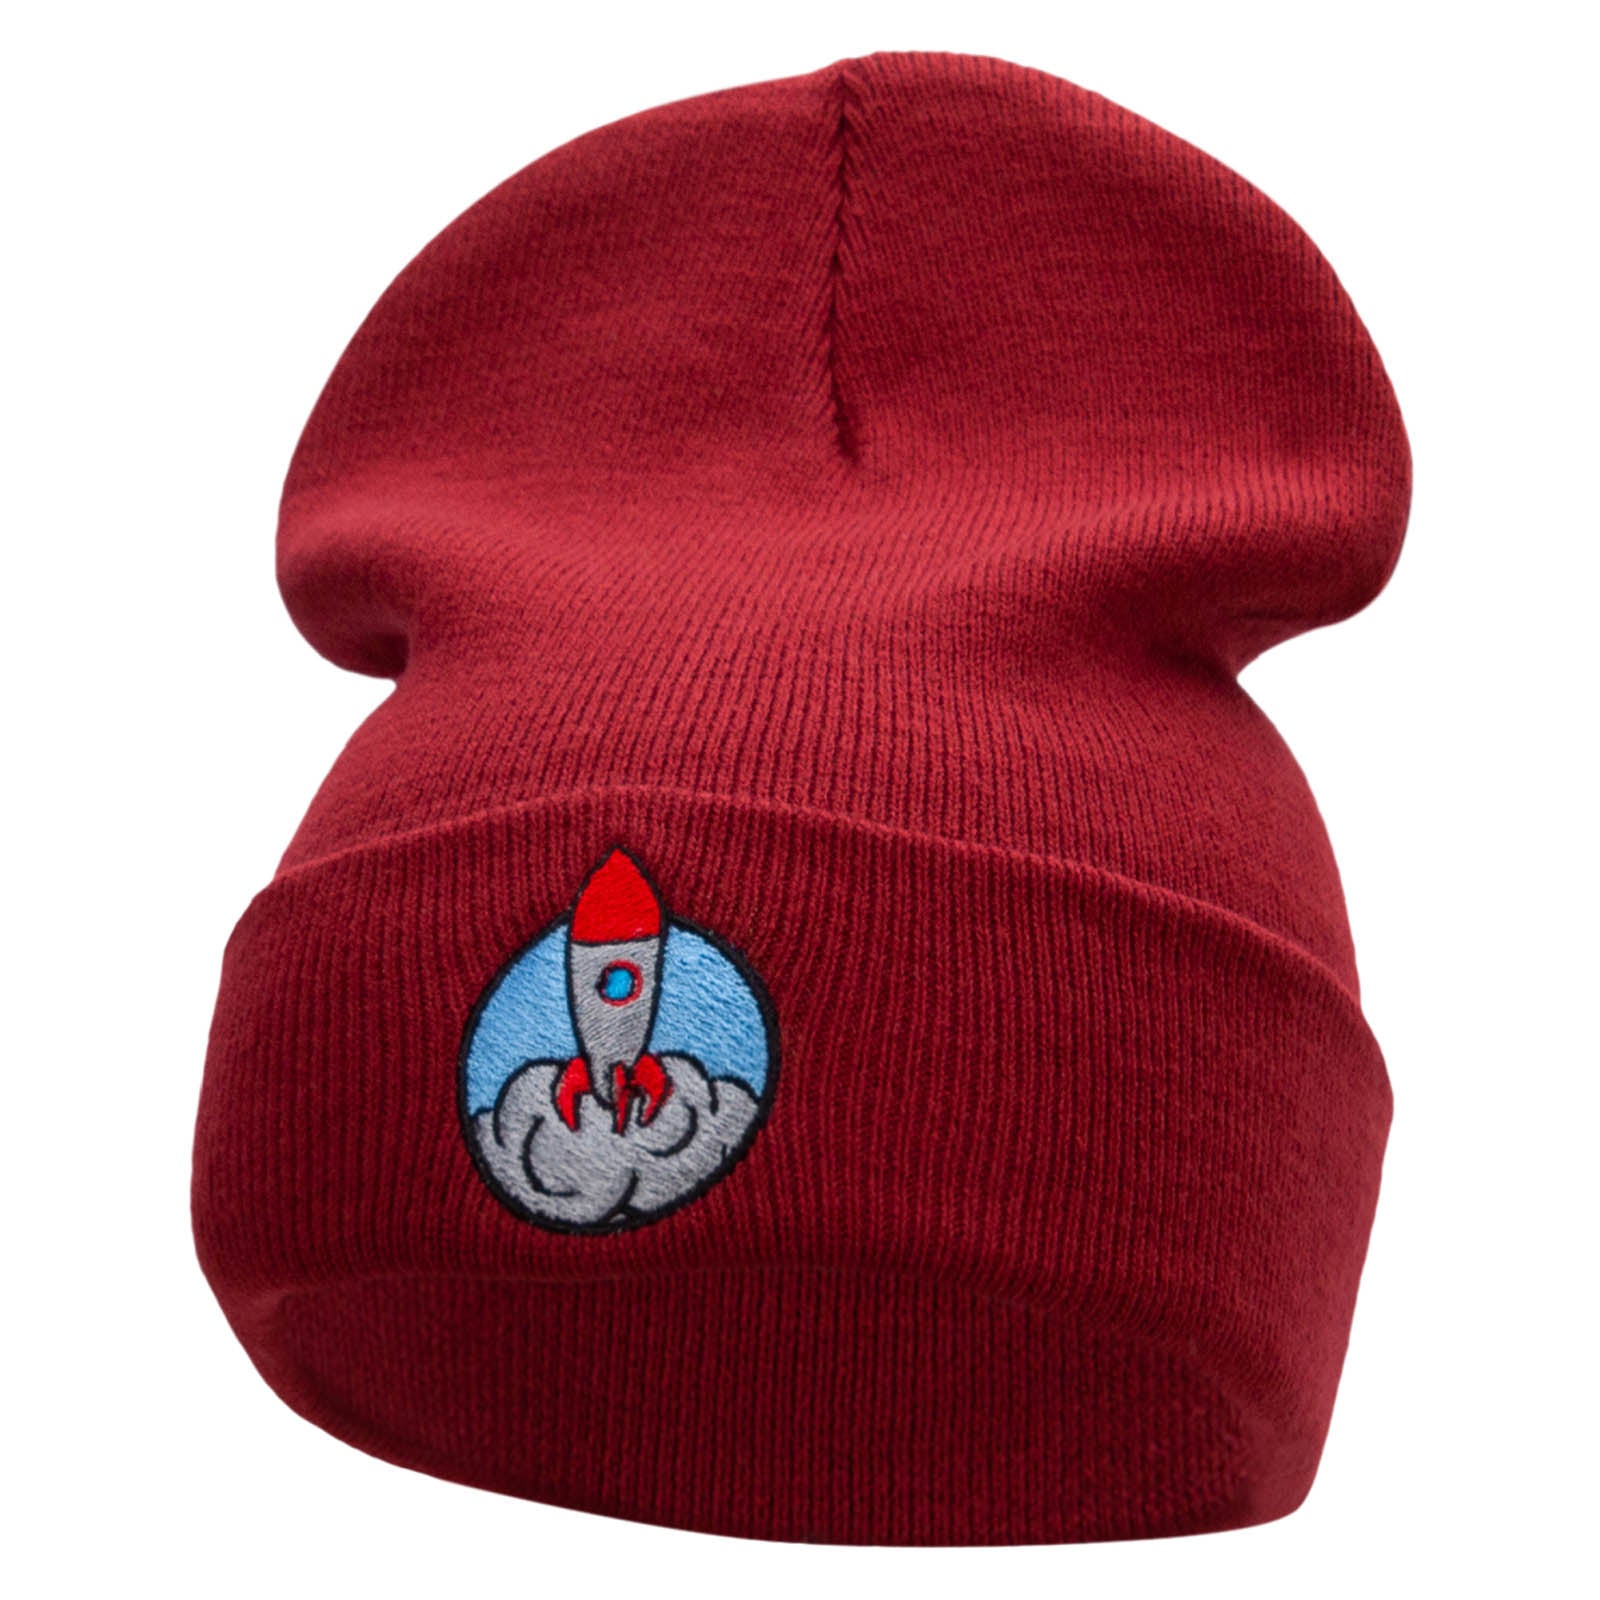 Rocket Takeoff Embroidered 12 Inch Long Knitted Beanie - Maroon OSFM